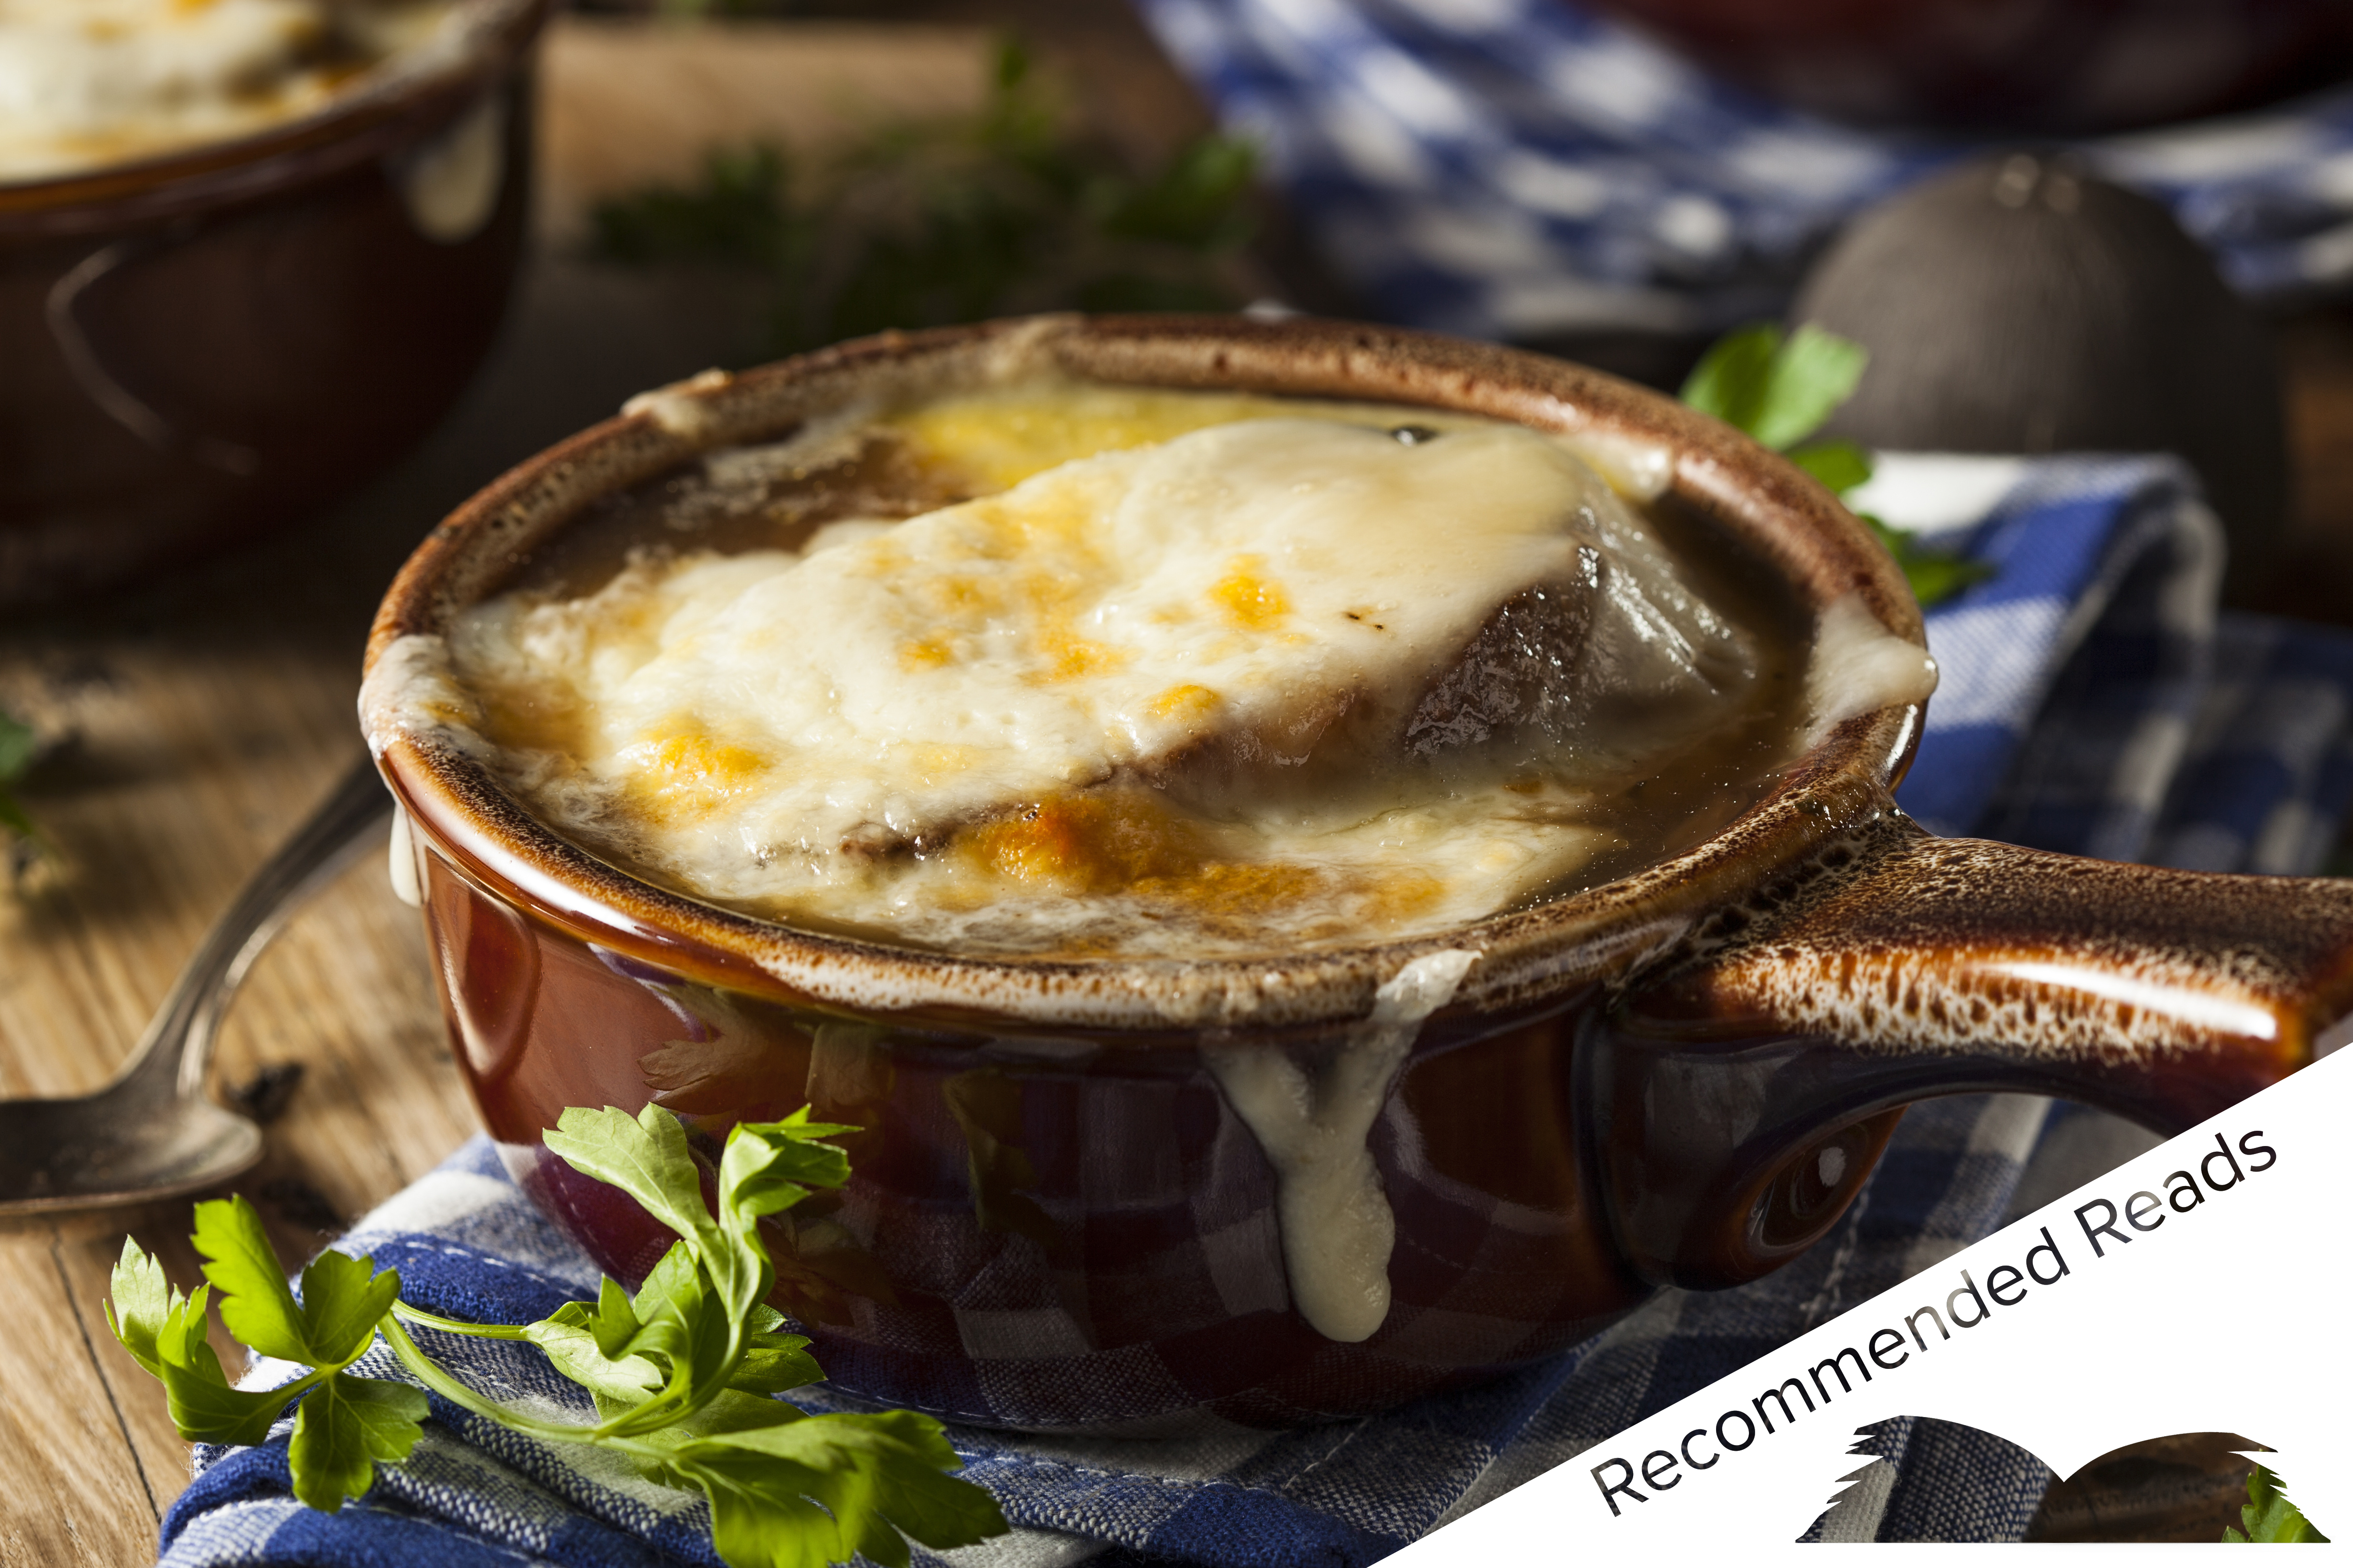 A bowl of piping hot French onion soup